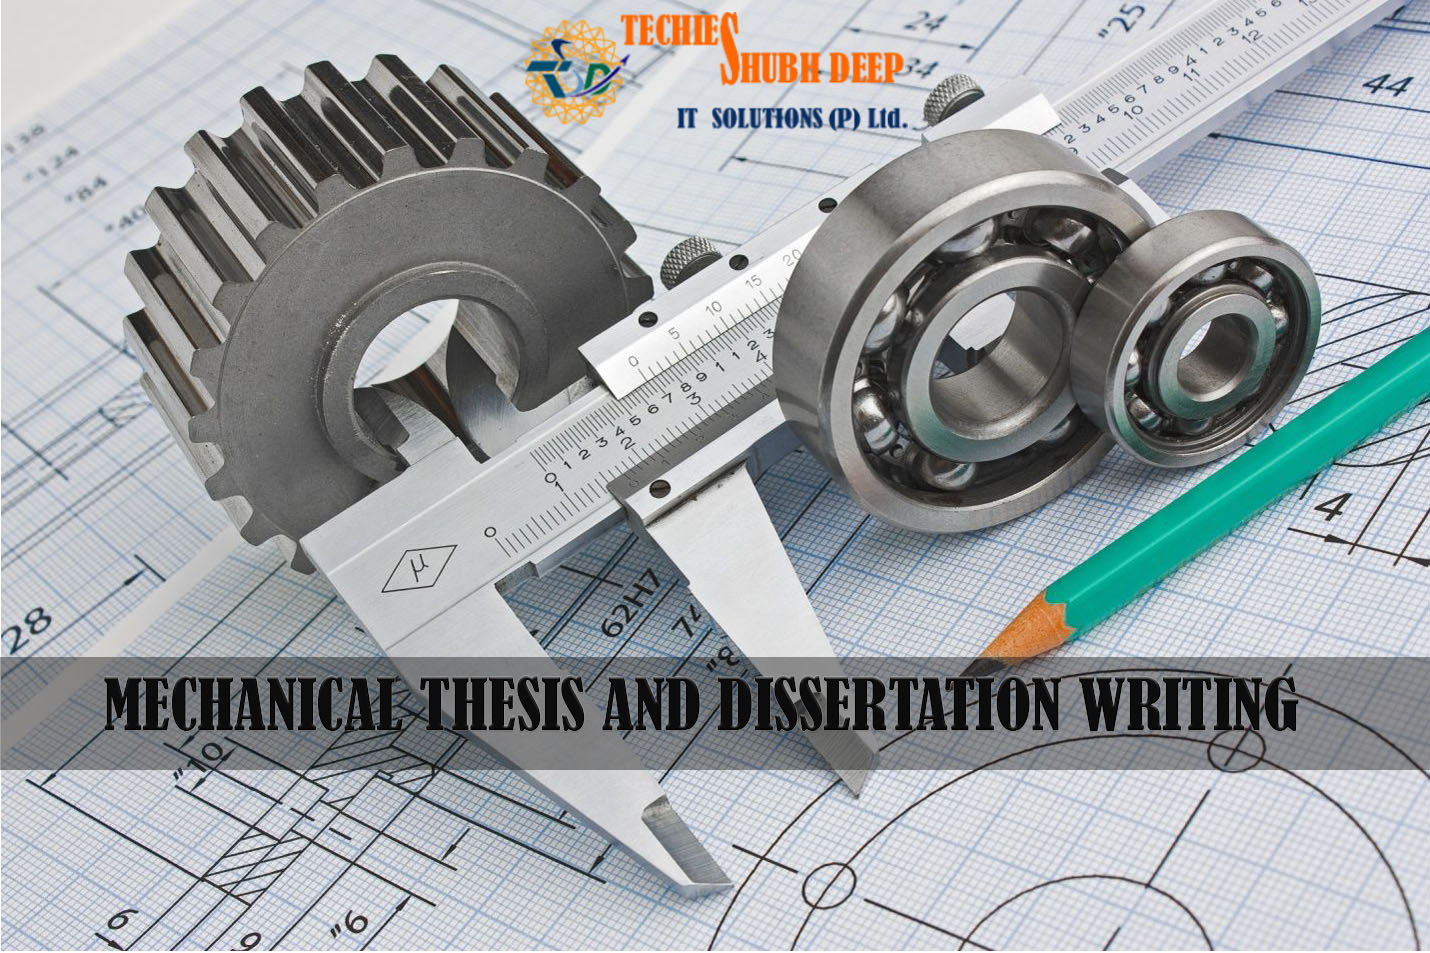 Mechanical Engineering thesis writing services